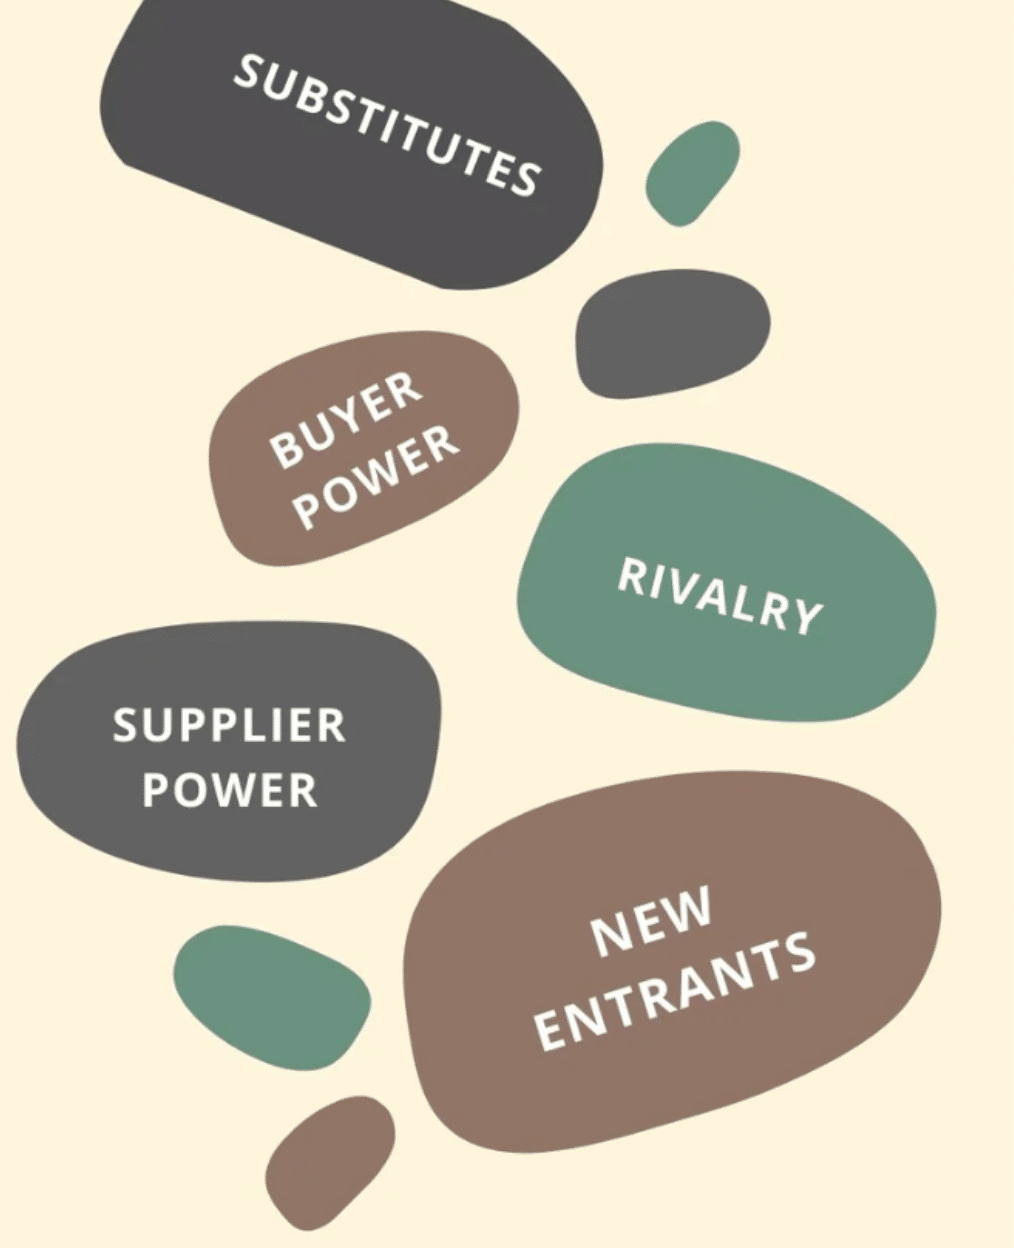 porter's five forces template